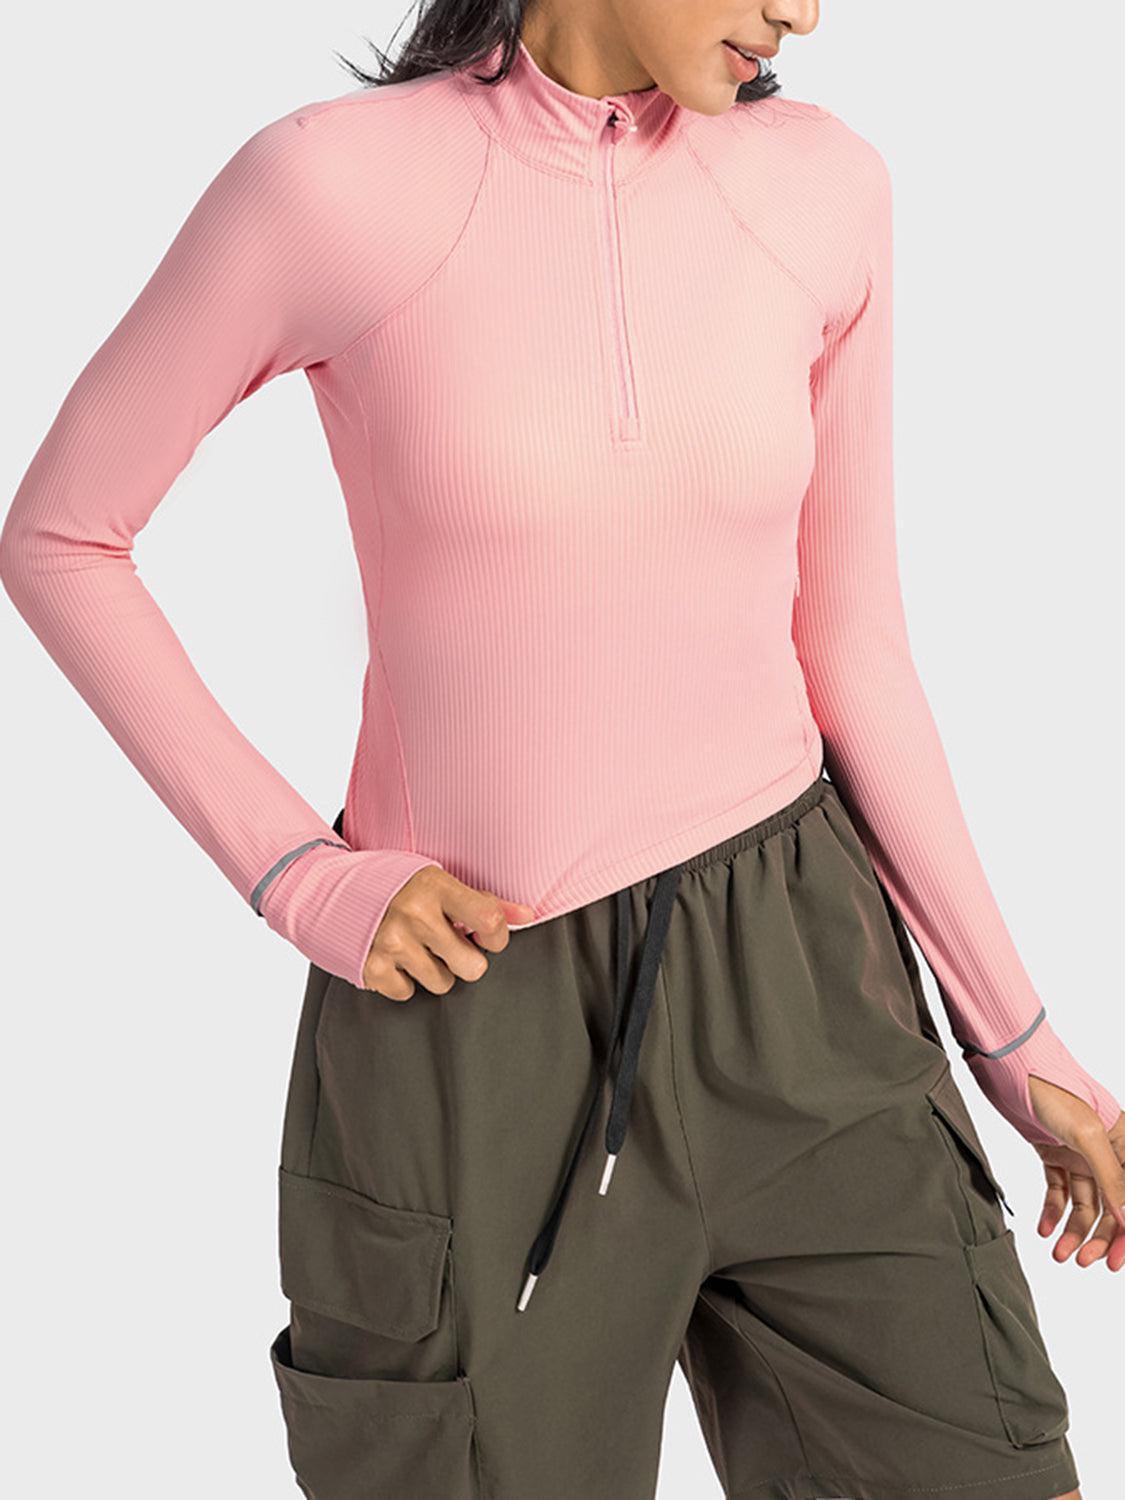 a woman wearing a pink top and cargo shorts